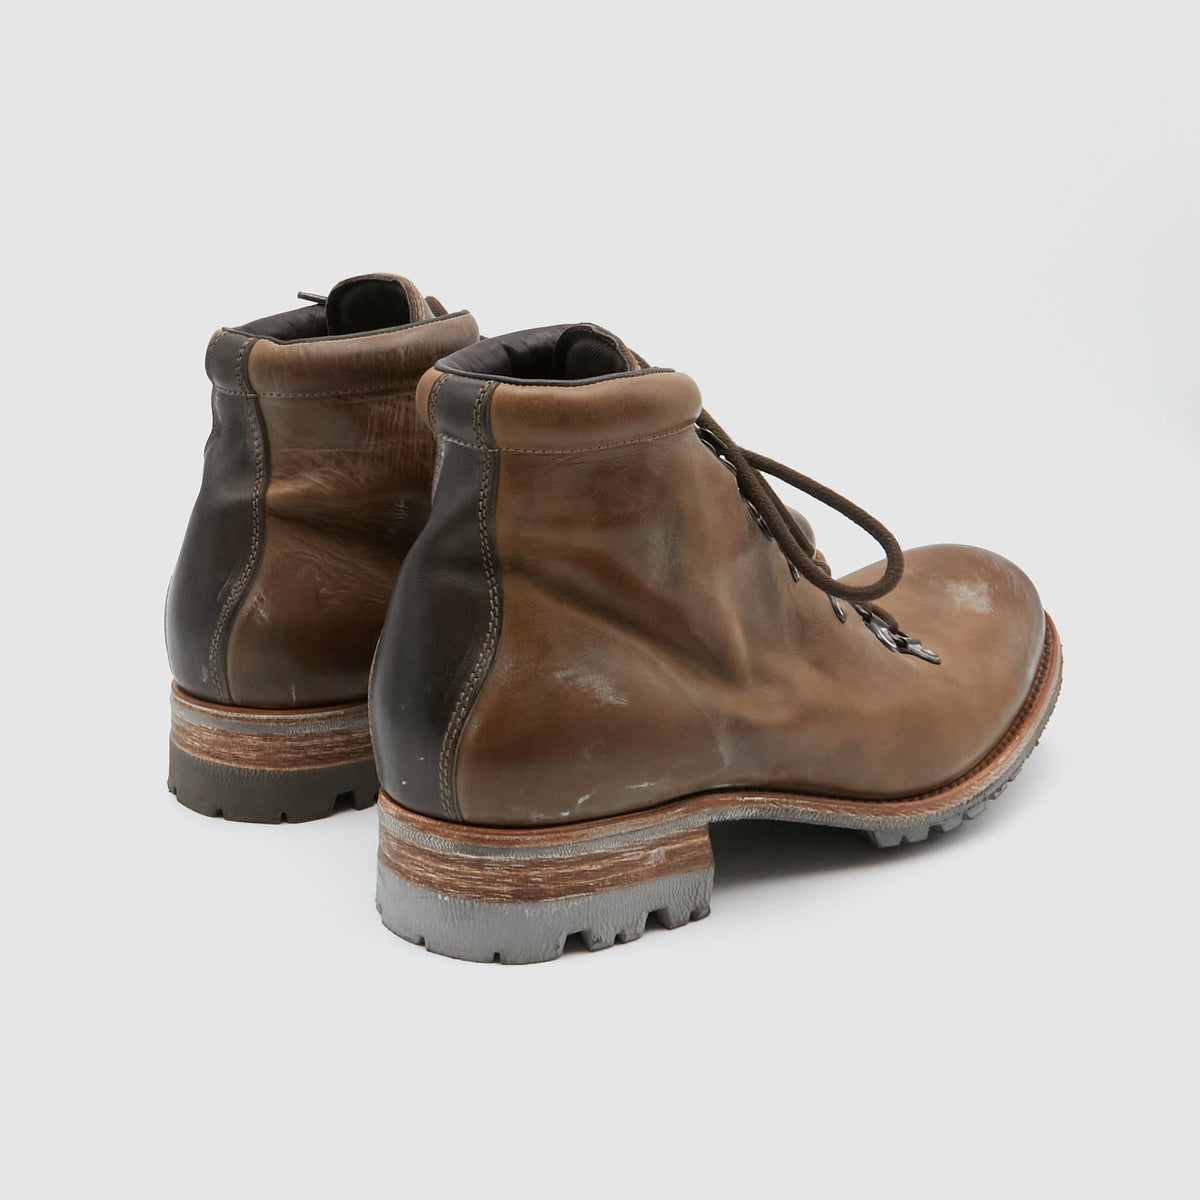 n.d.c. made by hand Montblanc Barrage Wash Boots